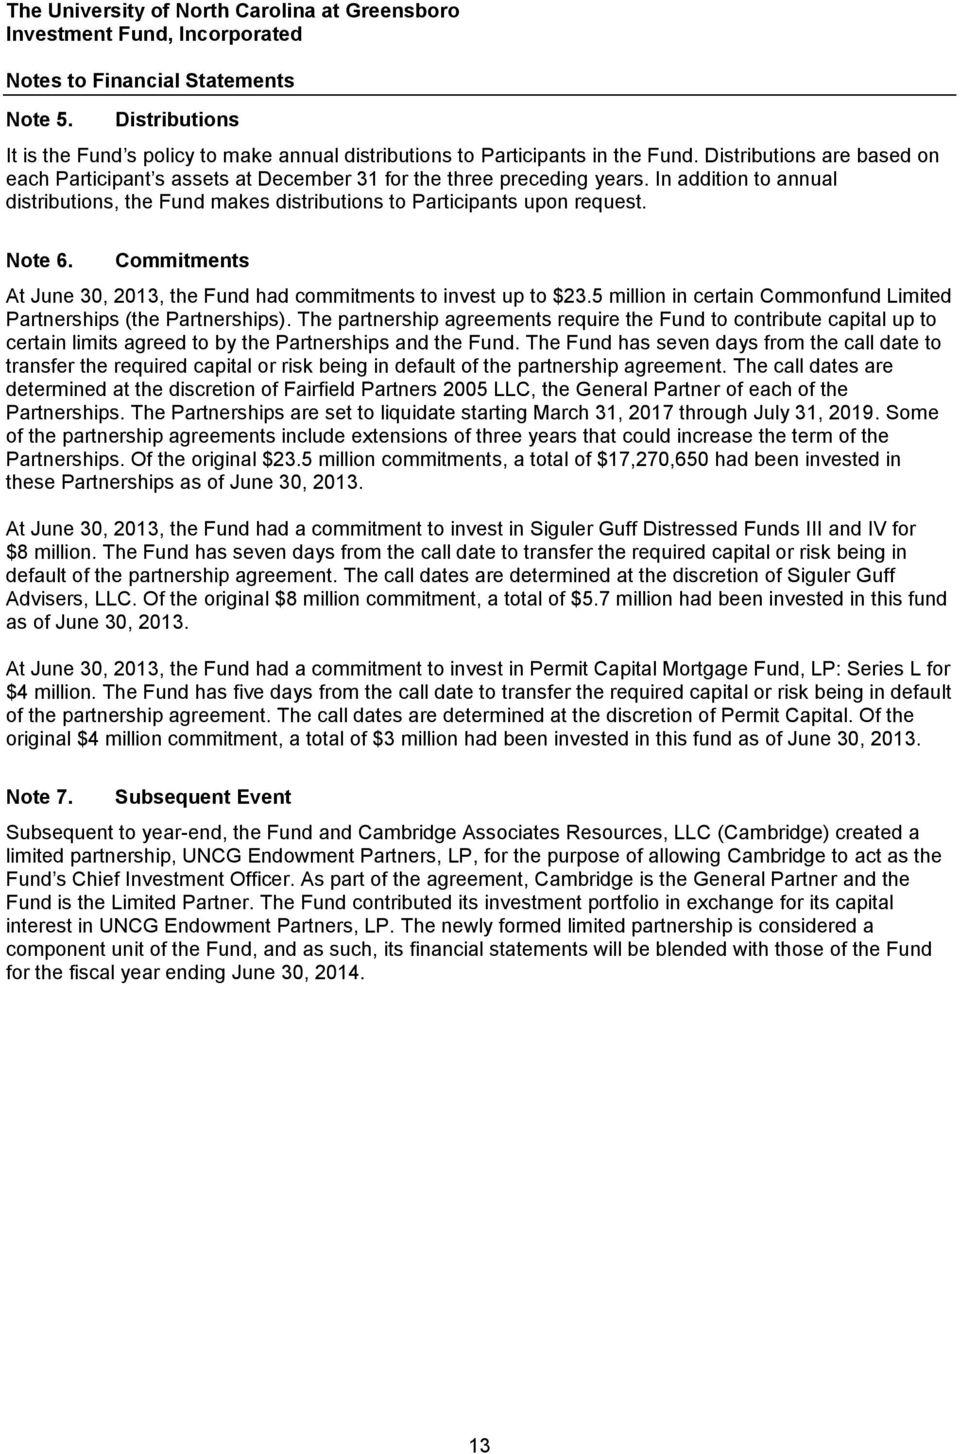 Note 6. Commitments At June 30, 2013, the Fund had commitments to invest up to $23.5 million in certain Commonfund Limited Partnerships (the Partnerships).